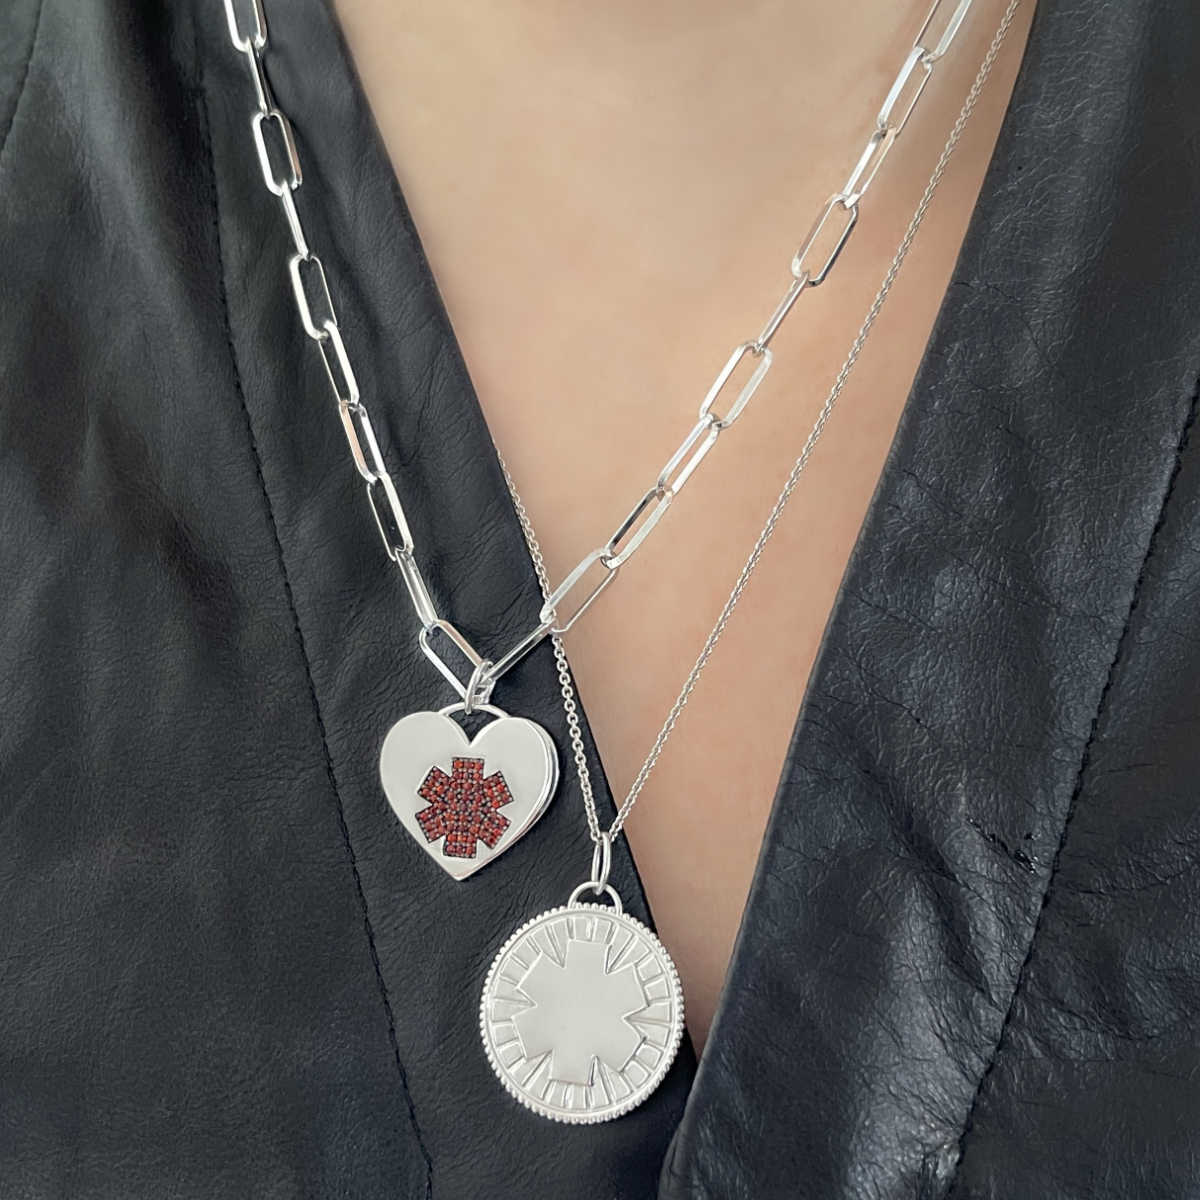 Heart Shaped Medical Alert Necklace | Sterling Silver Medical ID Necklace Charm for Women| Pretty Medical Alert Bracelets from Charmed Medical Jewelry